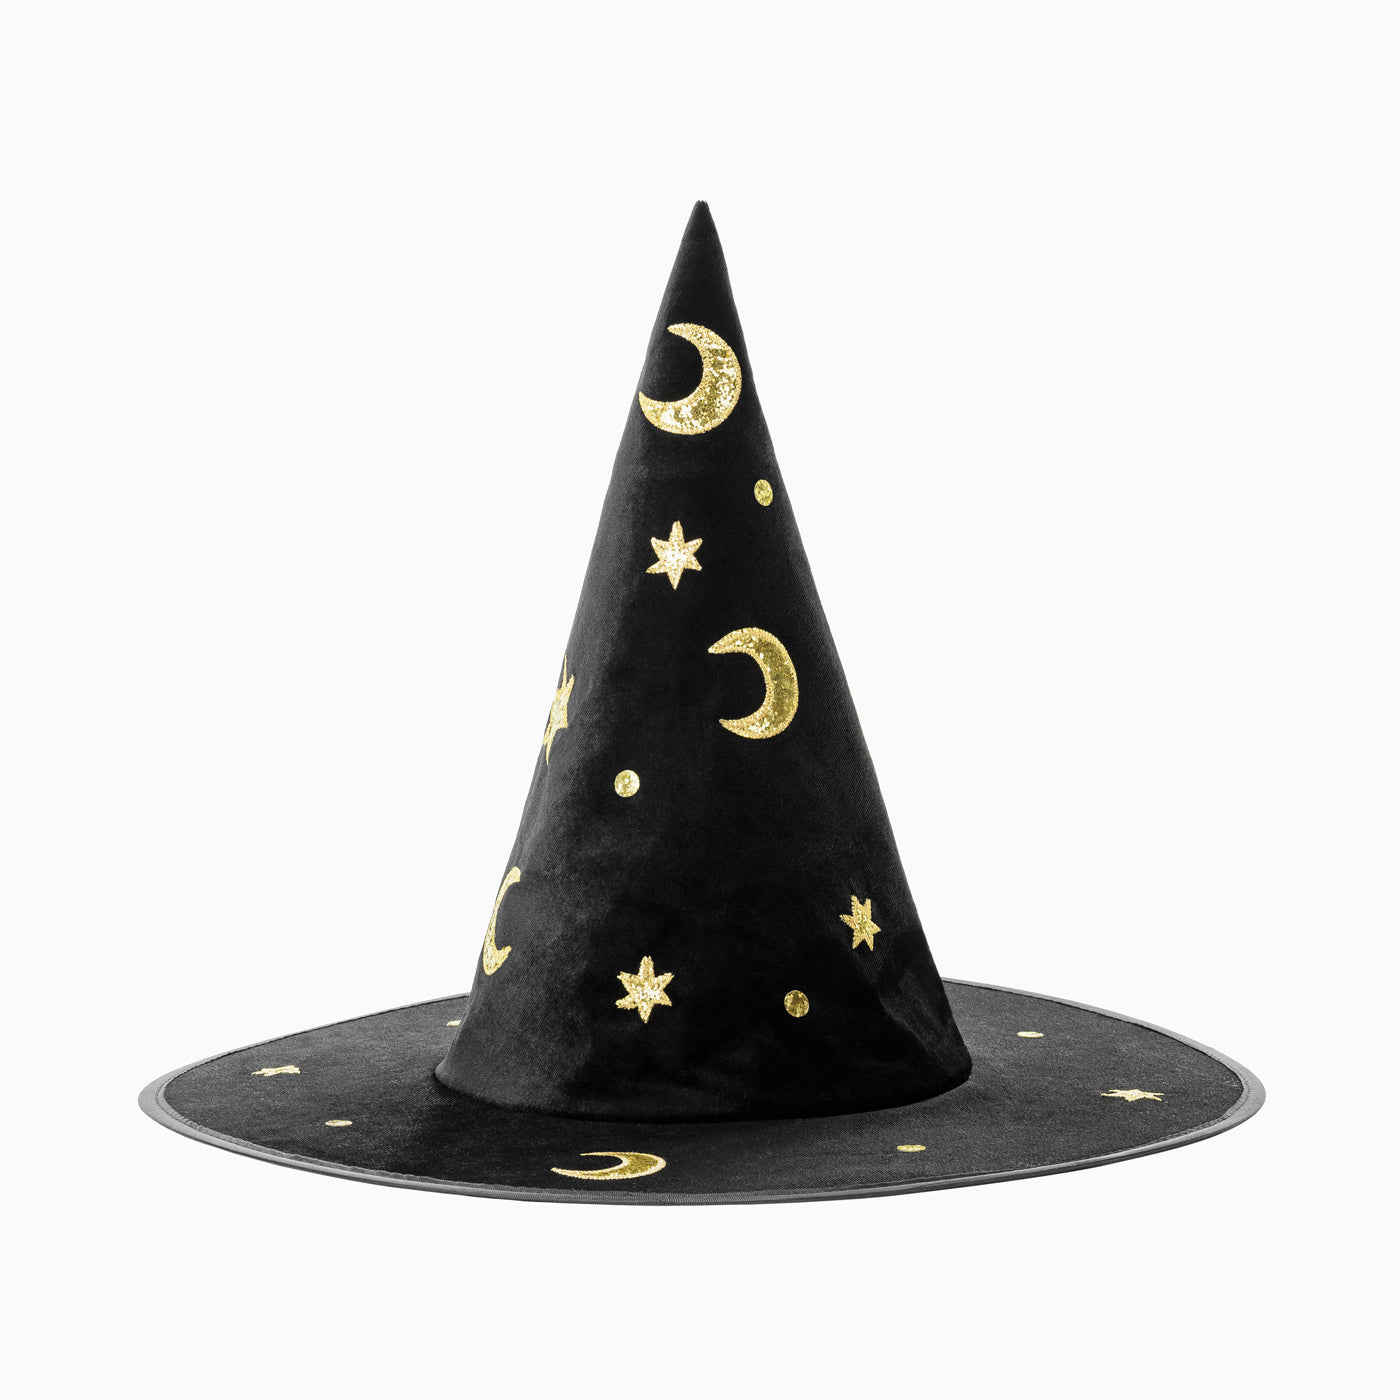 Decorated witch hat